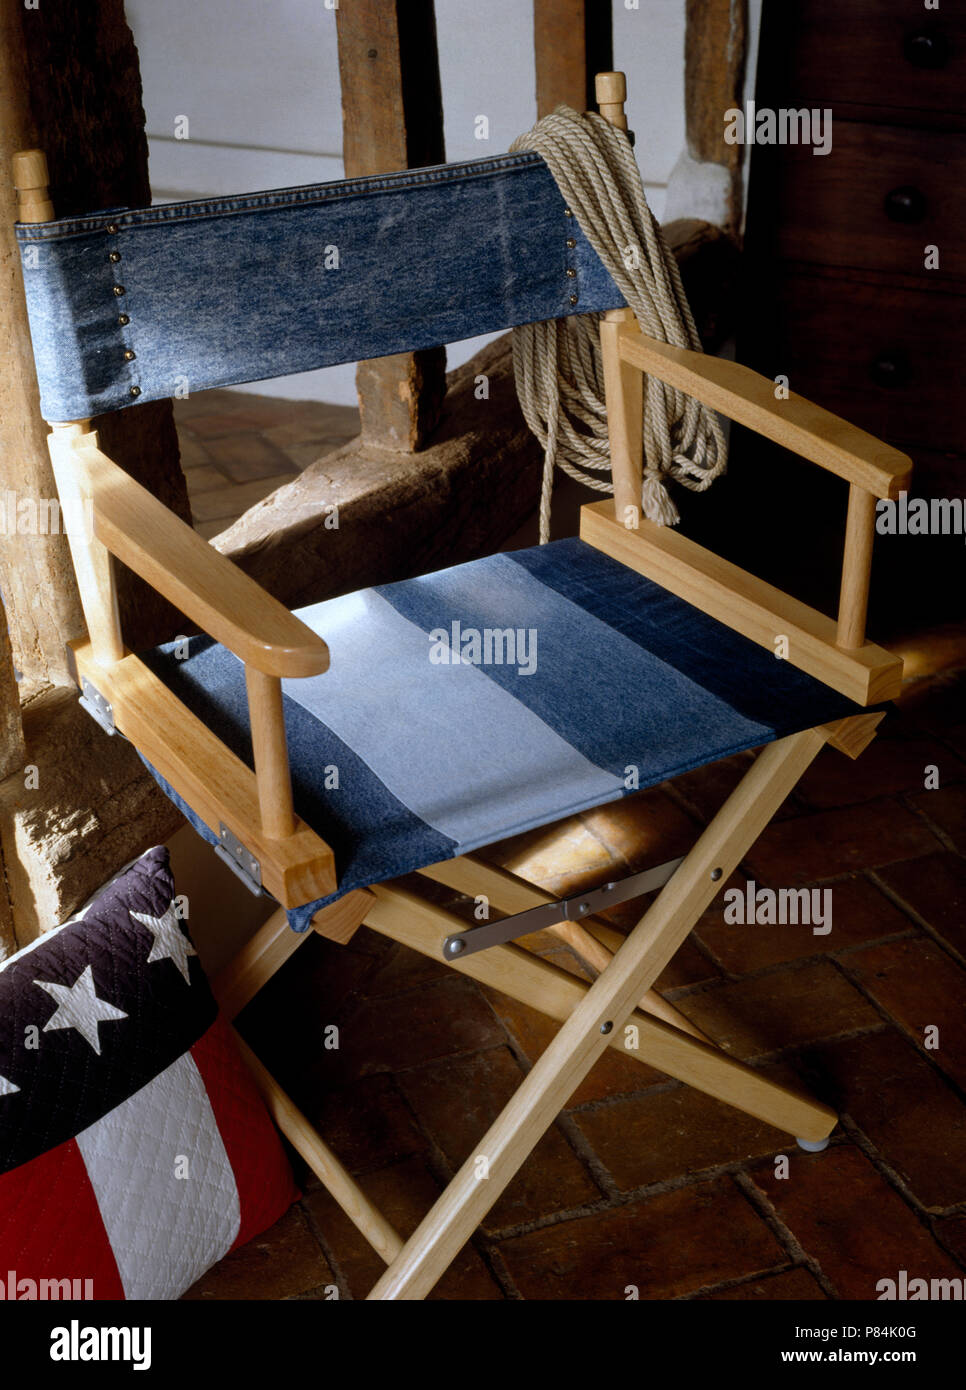 Close-up of a director's chair with new seat and sling made from blue  canvas and an old pair of denim jeans Stock Photo - Alamy